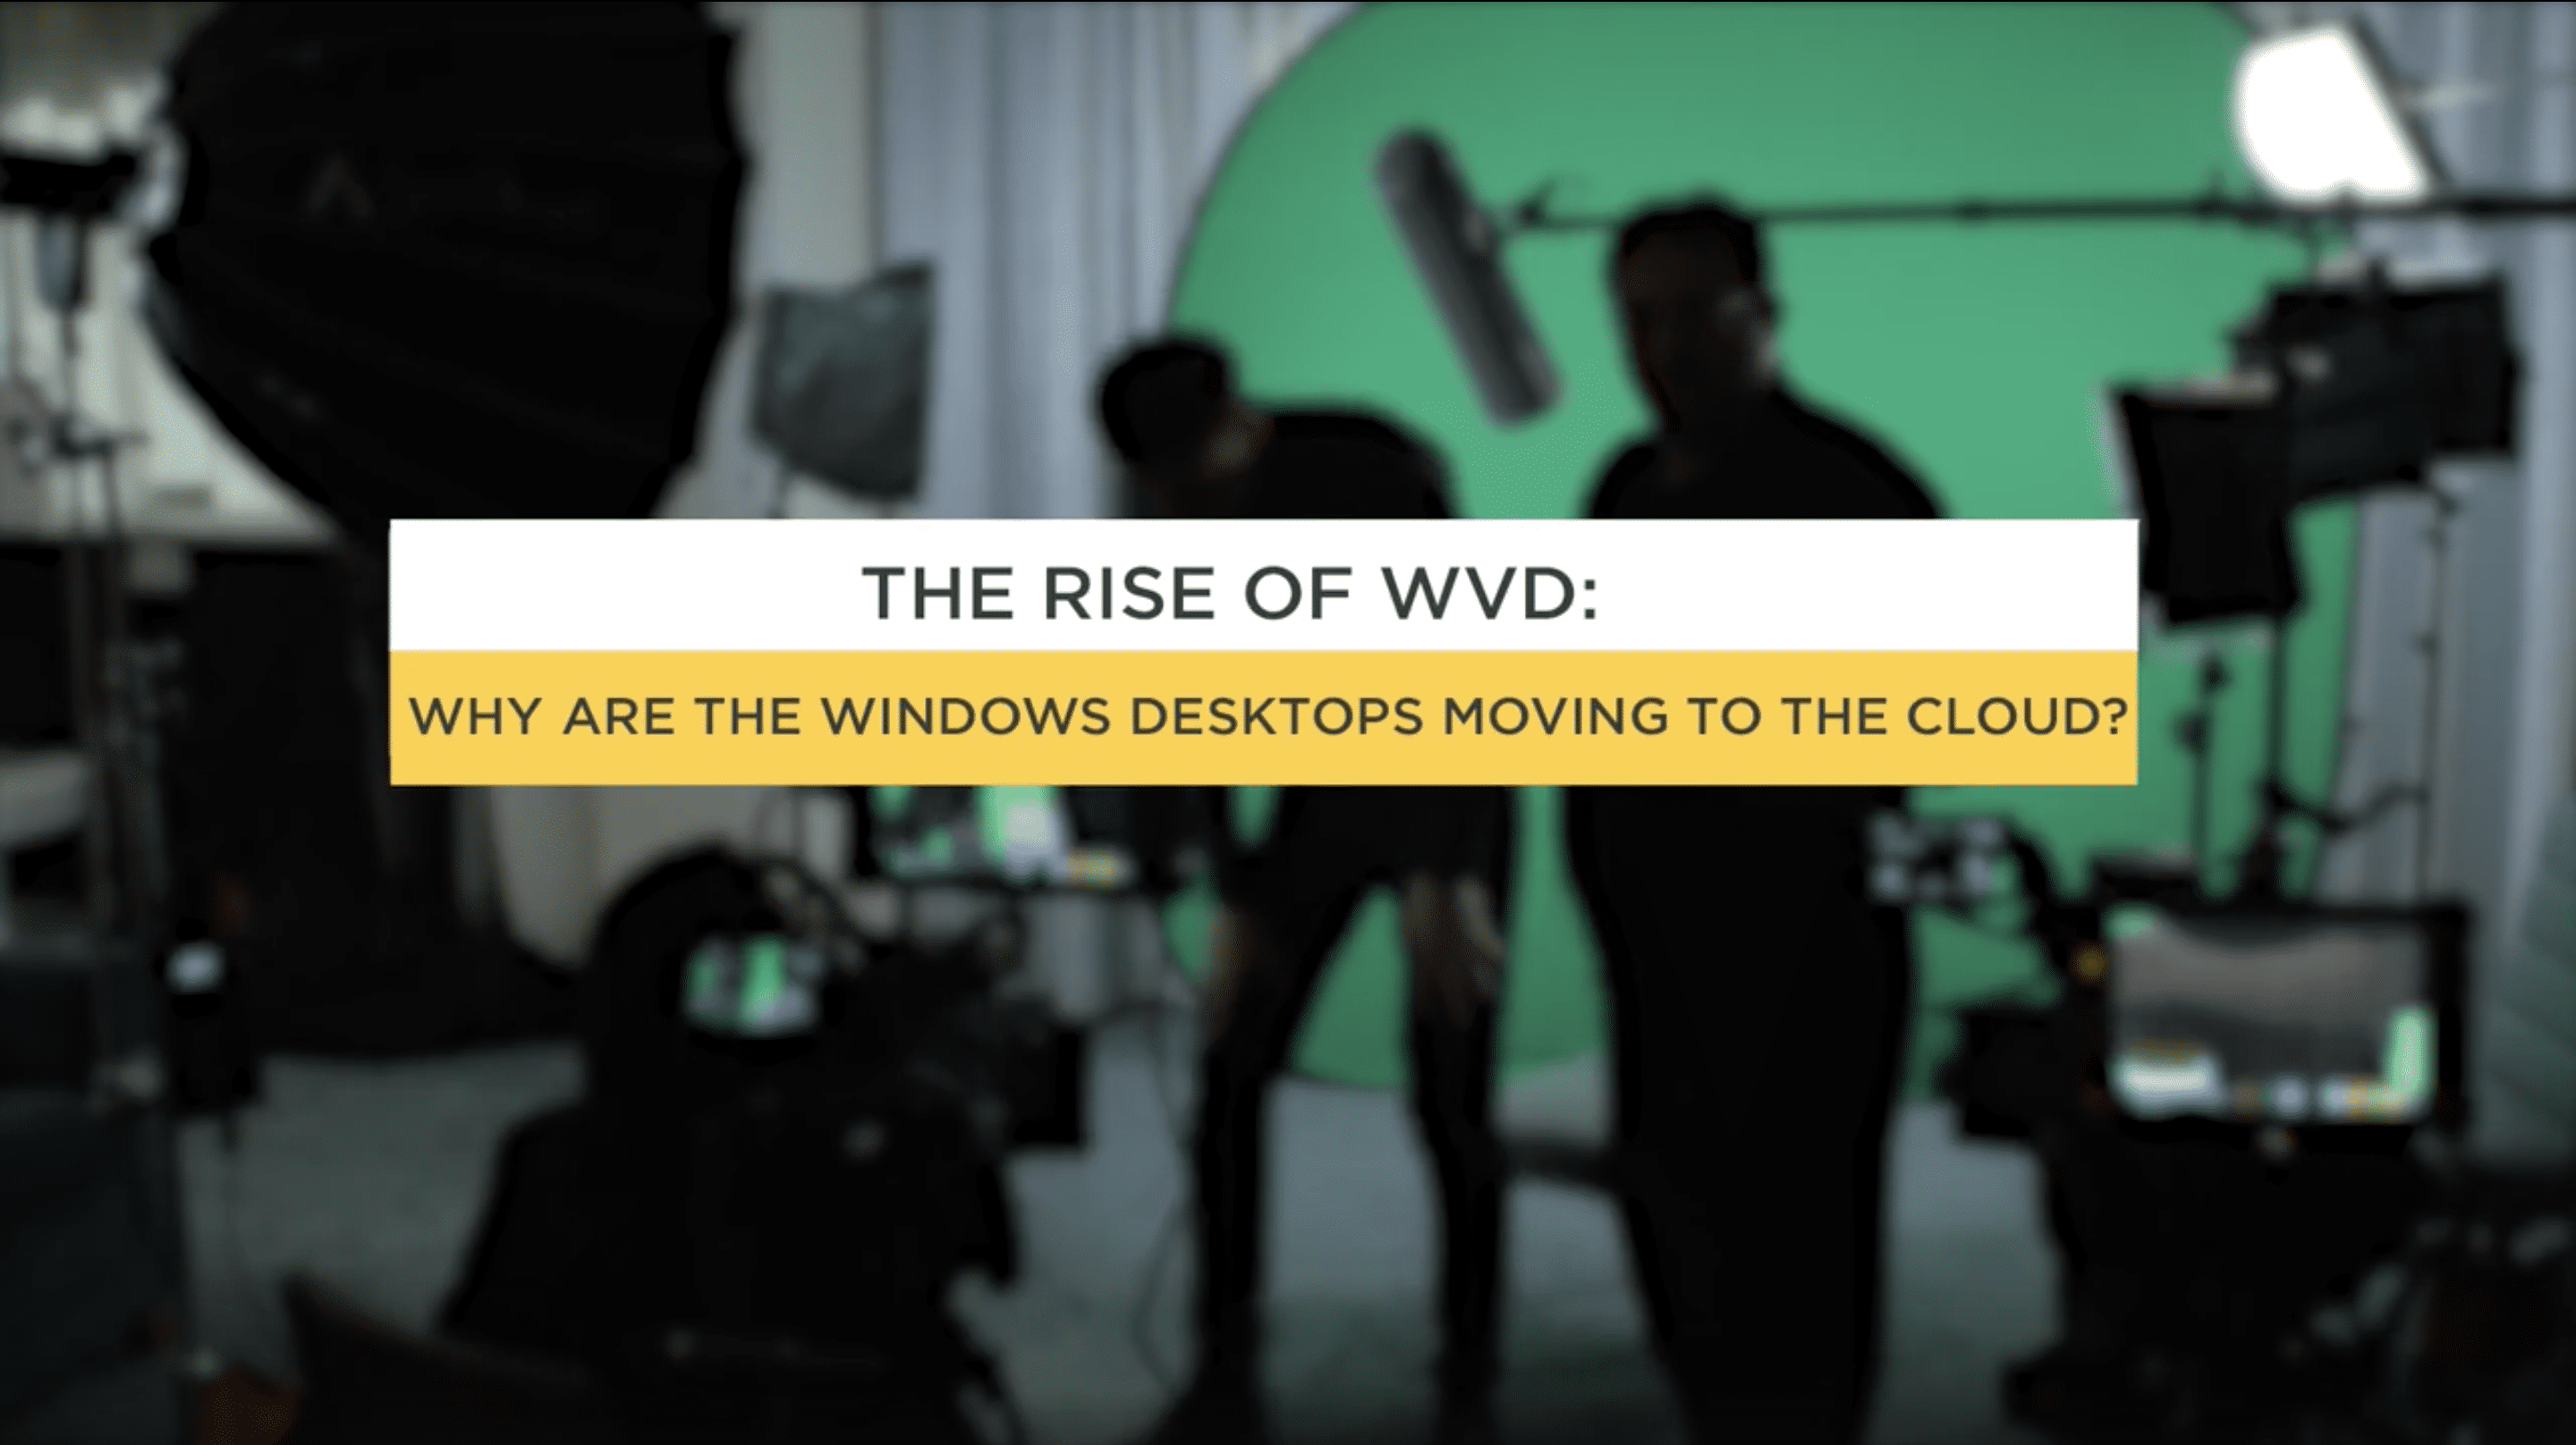 The Rise of WVD: Why are Windows Desktops Moving to the Cloud – Part 2